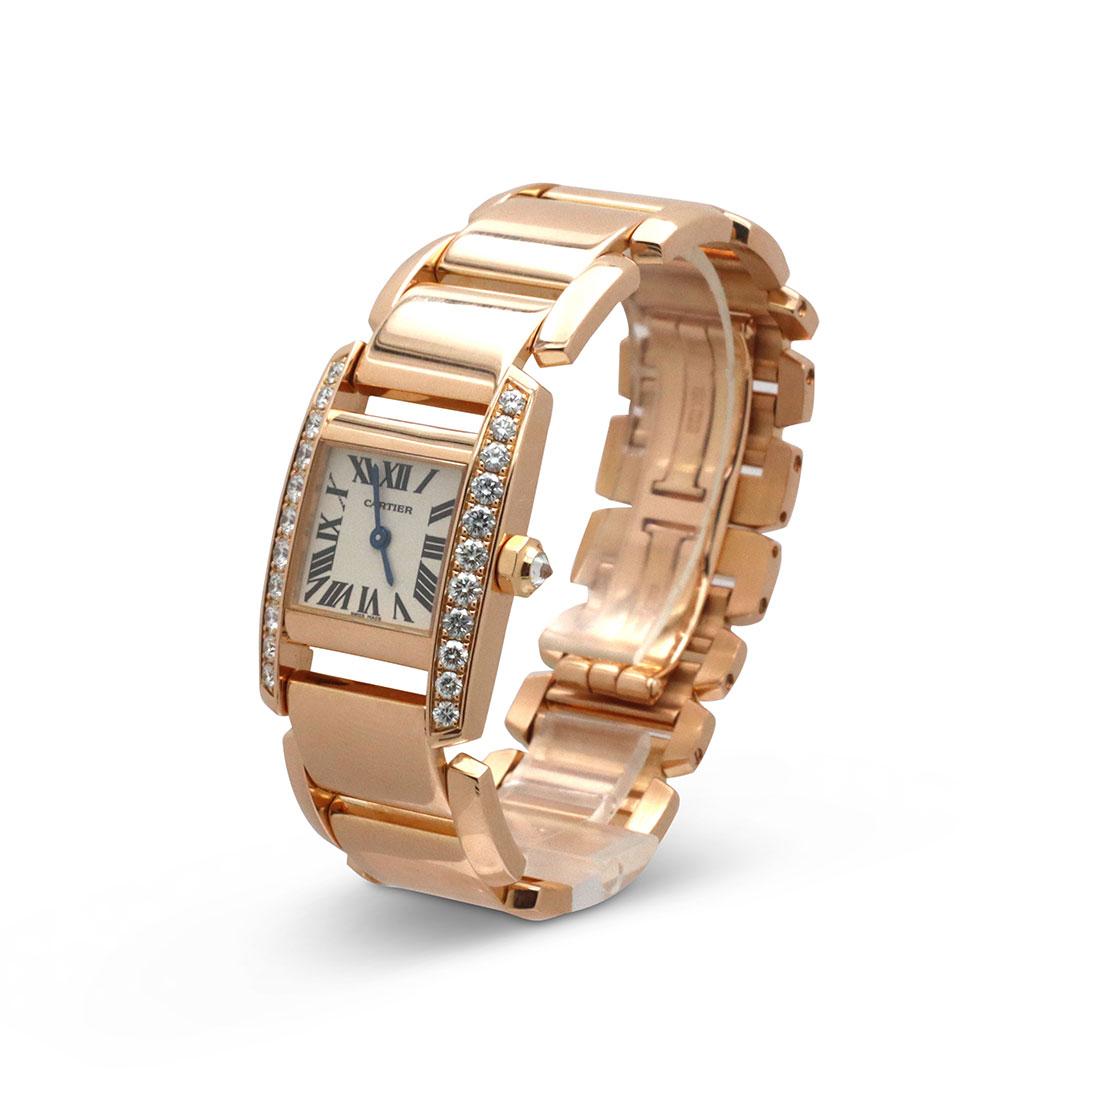 Authentic Cartier 'Tankissime' ladies watch crafted in 18 karat rose gold with diamond bezel.  The case measures 30mm x 20mm with a silvered dial and Roman Numeral hour markers and is accented by a diamond bezel and diamond-set crown.  The 18 karat